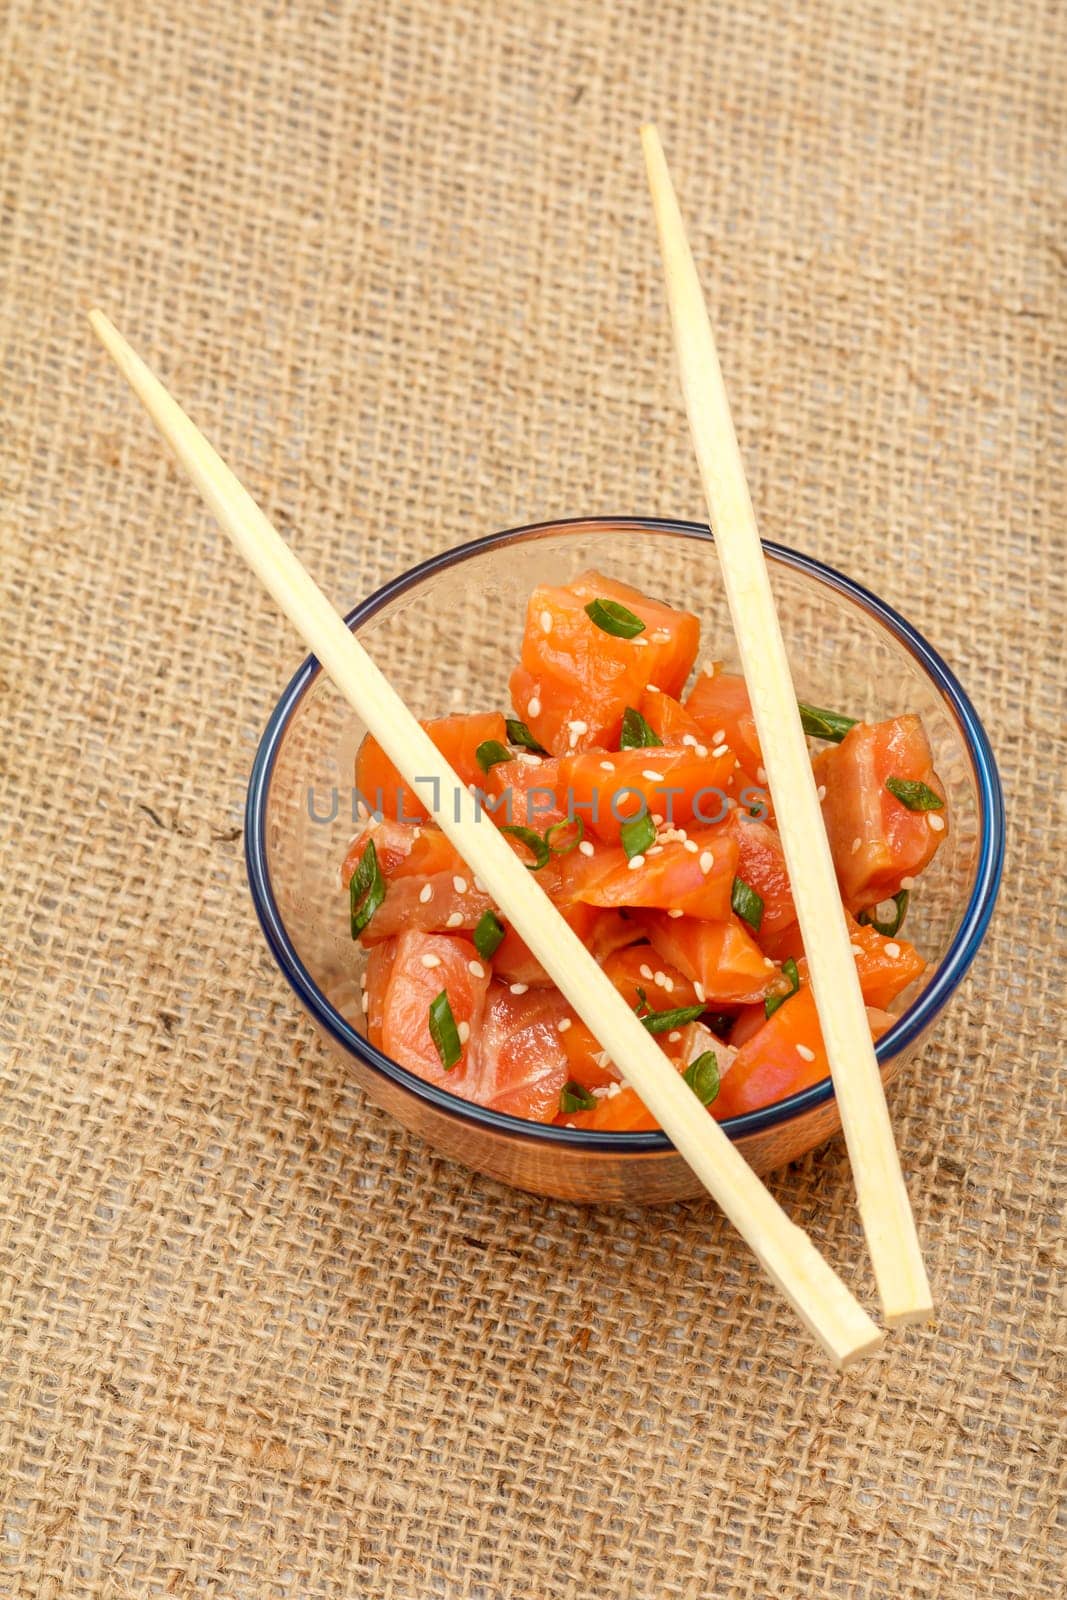 Hawaiian salmon poke with green onions and sesame seeds in glass bowl with chopsticks on sackcloth. Top view. Organic seafood.